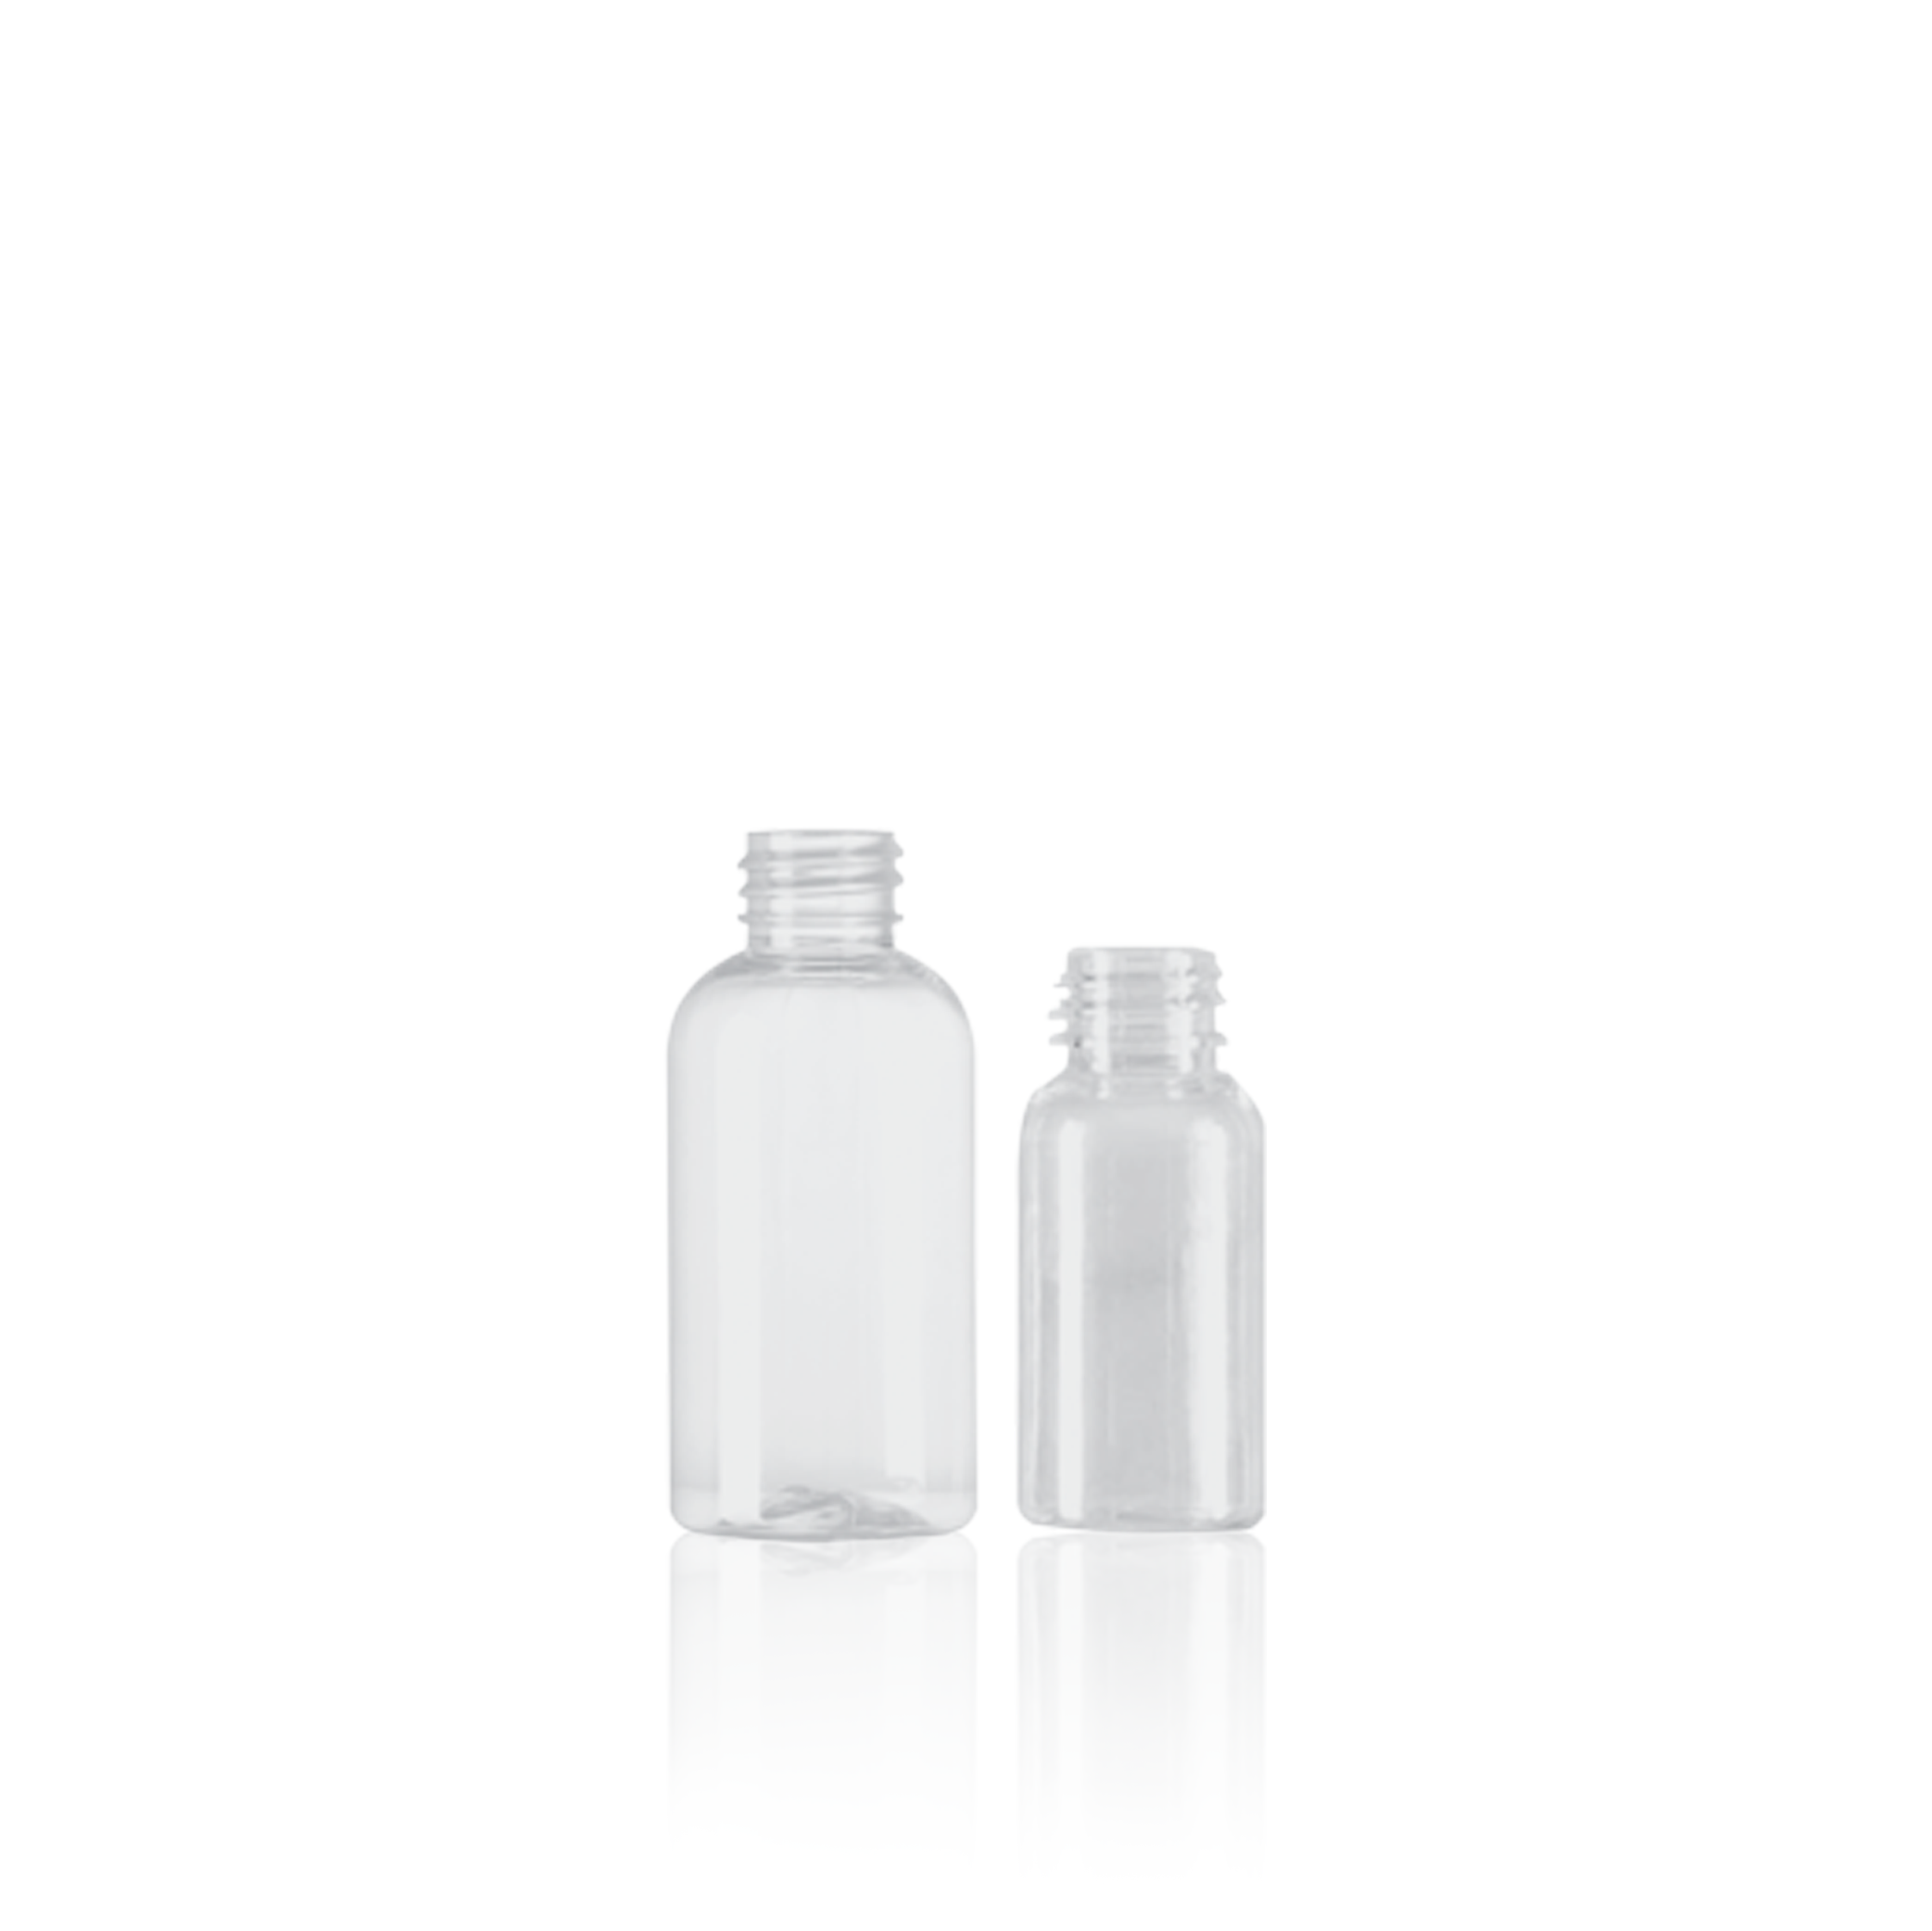 Wholesale 150ml Transparent Plastic PET Bottle With Scale, Empty Bottle, Small  Bottle, Clear Liquid Bottles Screw Safety Cap From Miraclecottage, $84.03